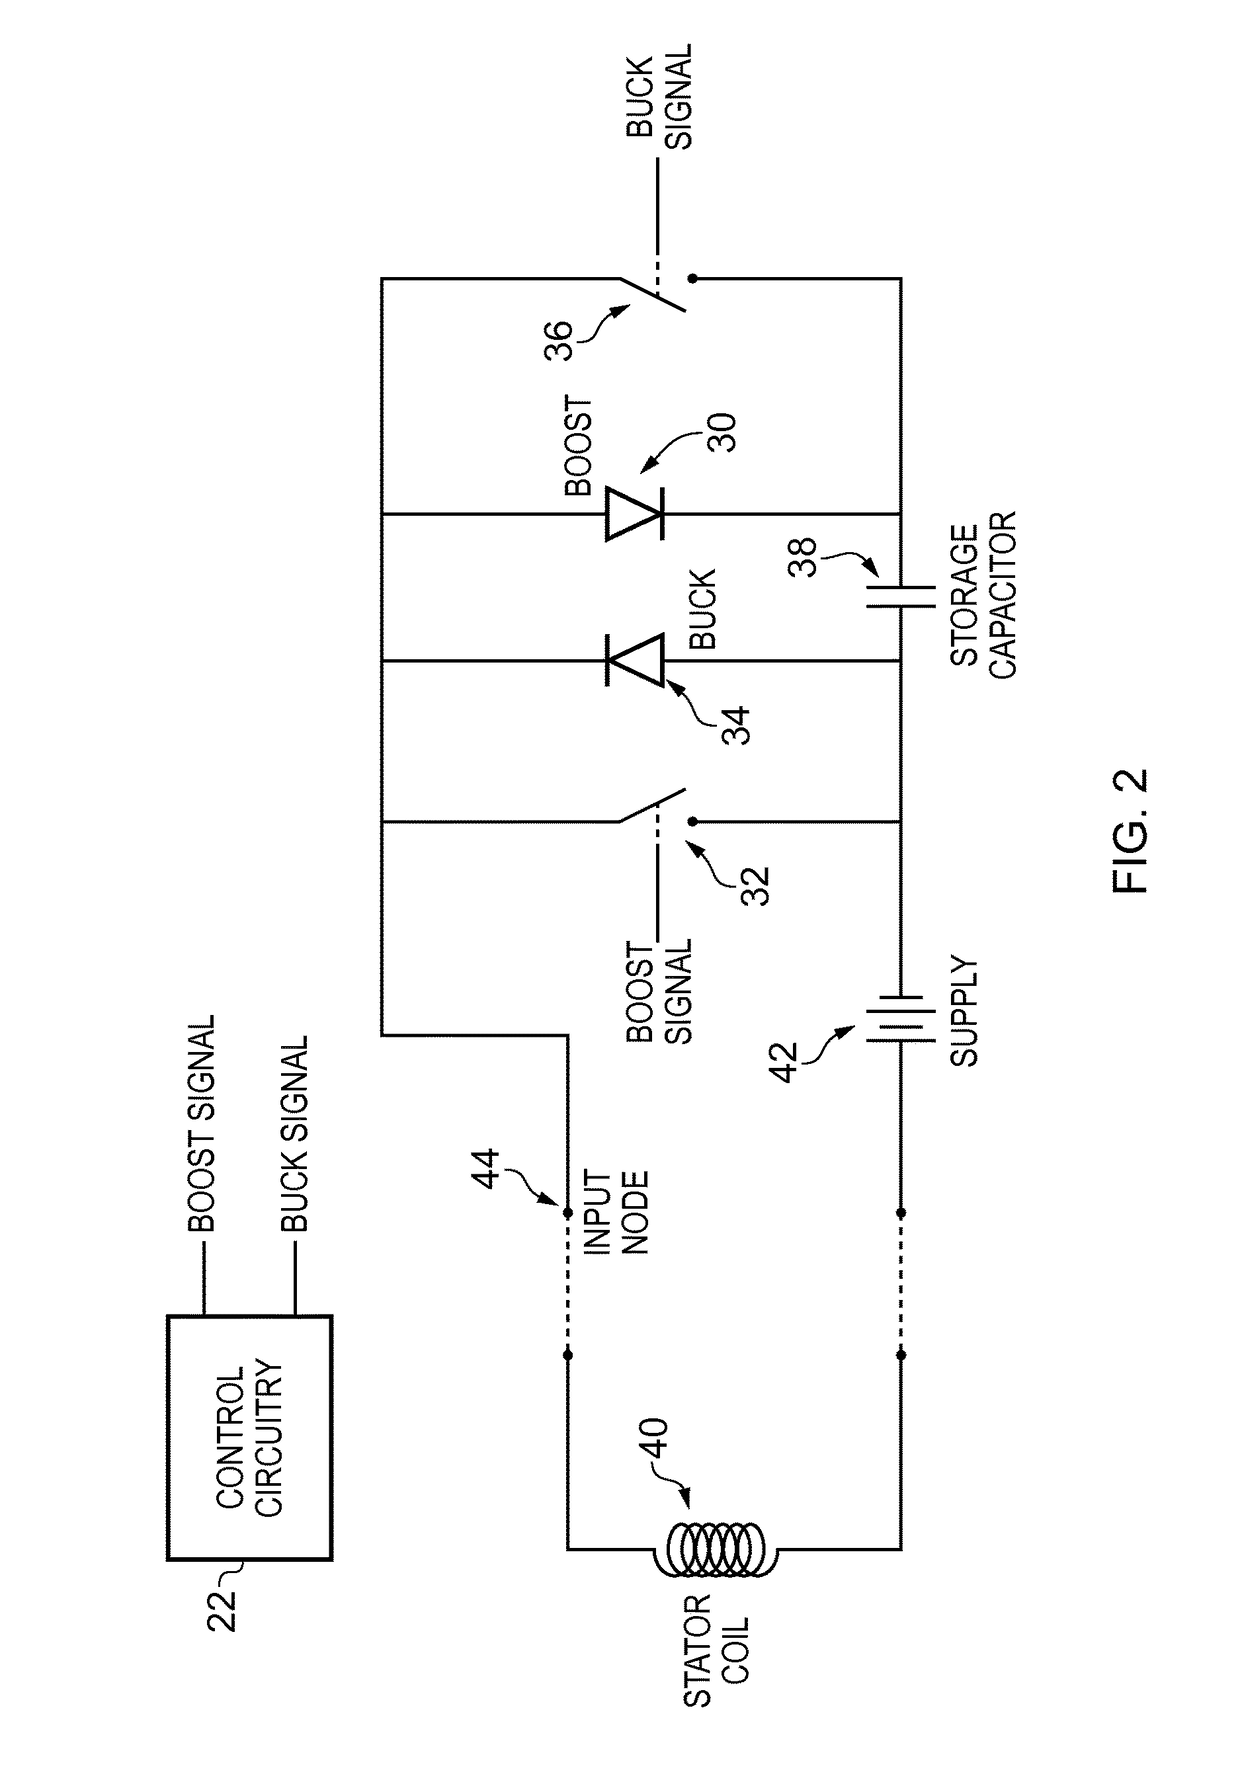 Electrical motor system and method of operating the electrical motor system